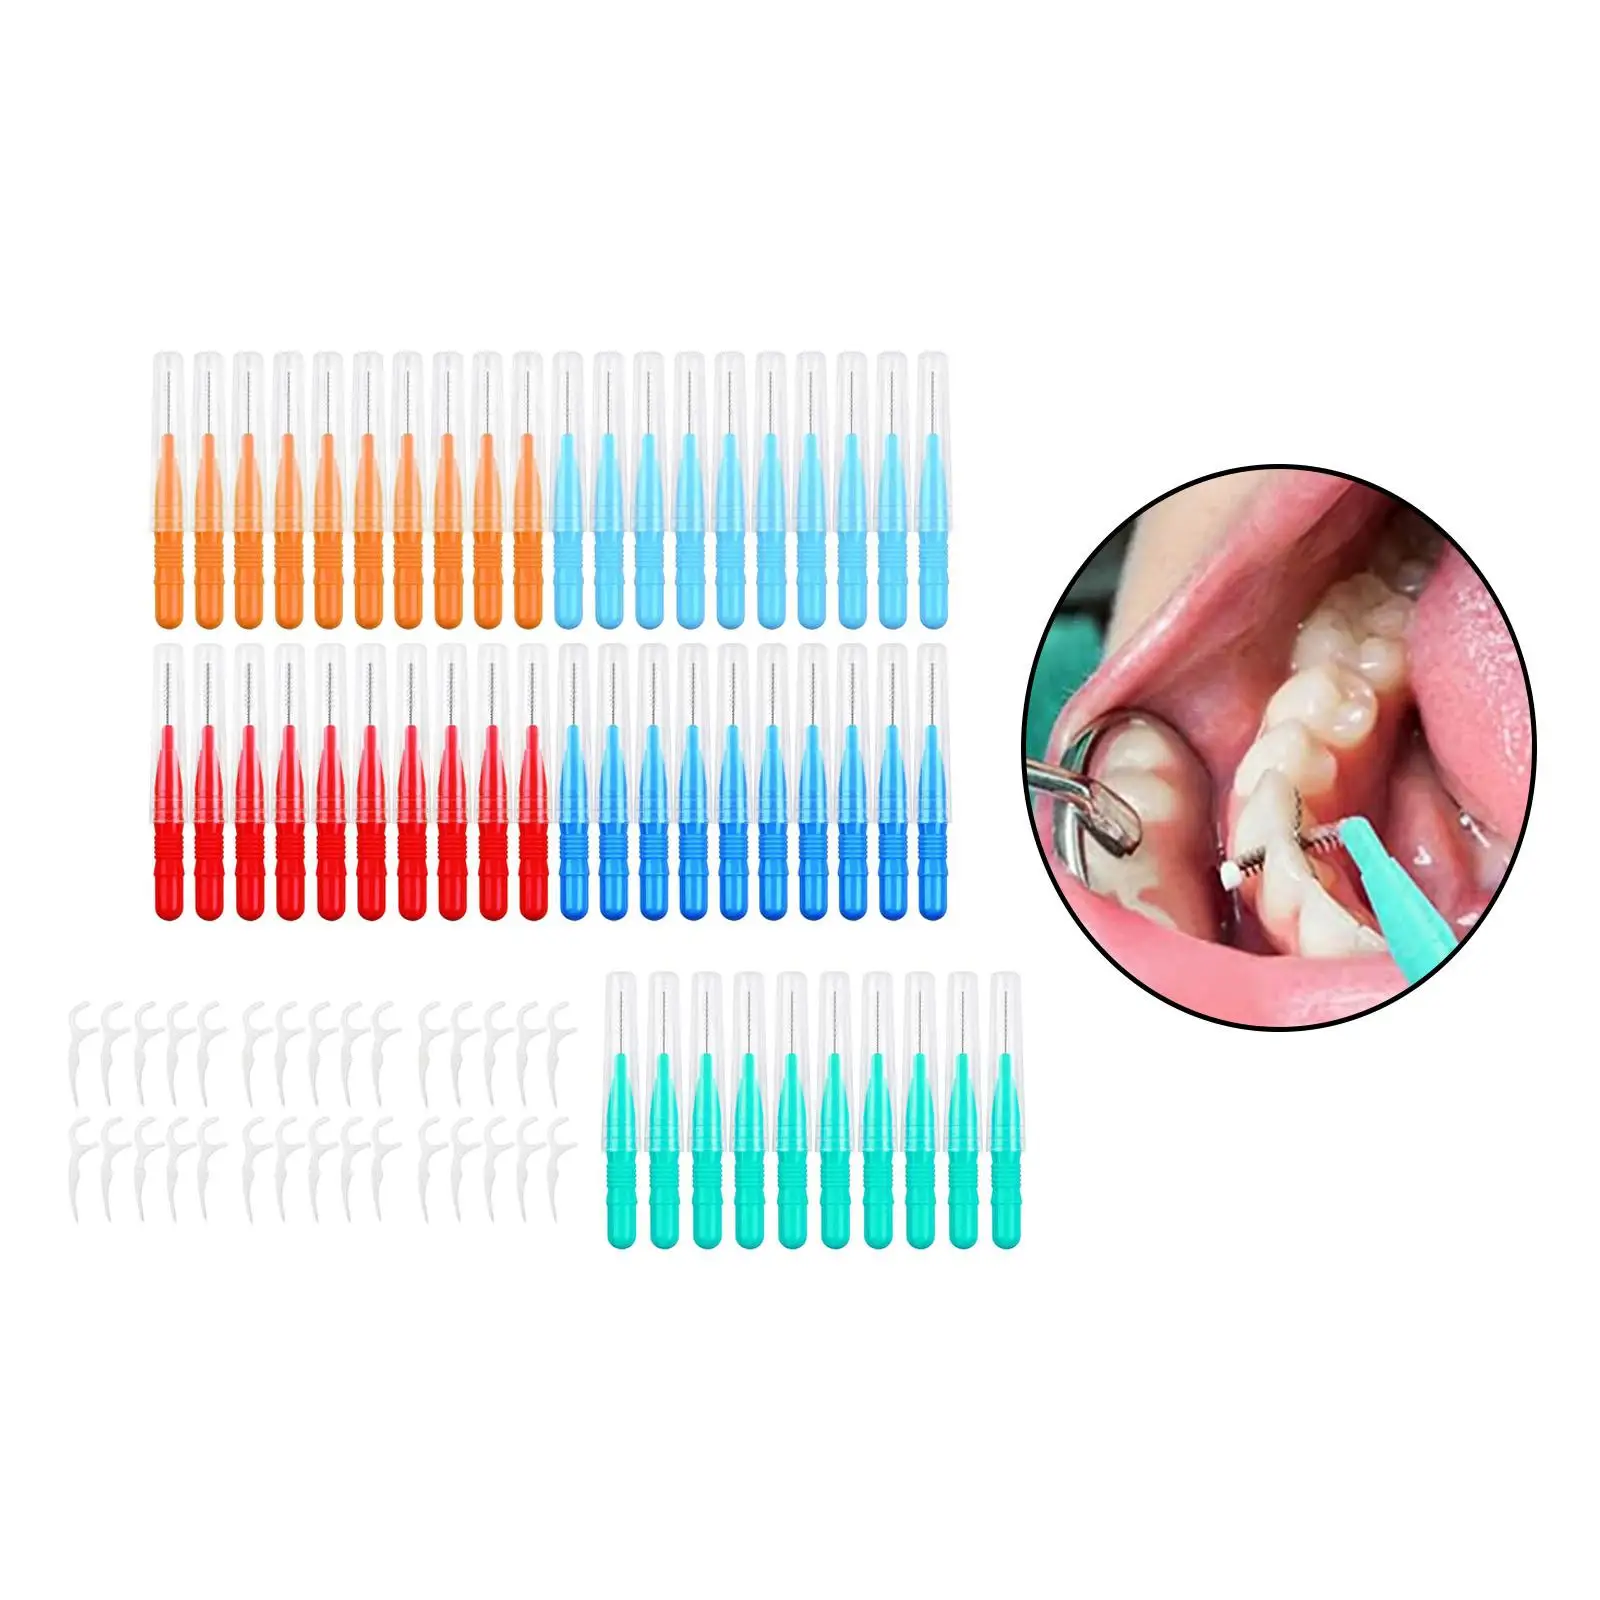 50 Pieces Interdental Brush 2/2.5/3mm Portable Travel 30Pcs Floss Sticks Mini Teeth Brushes Toothpicks Tooth Cleaning